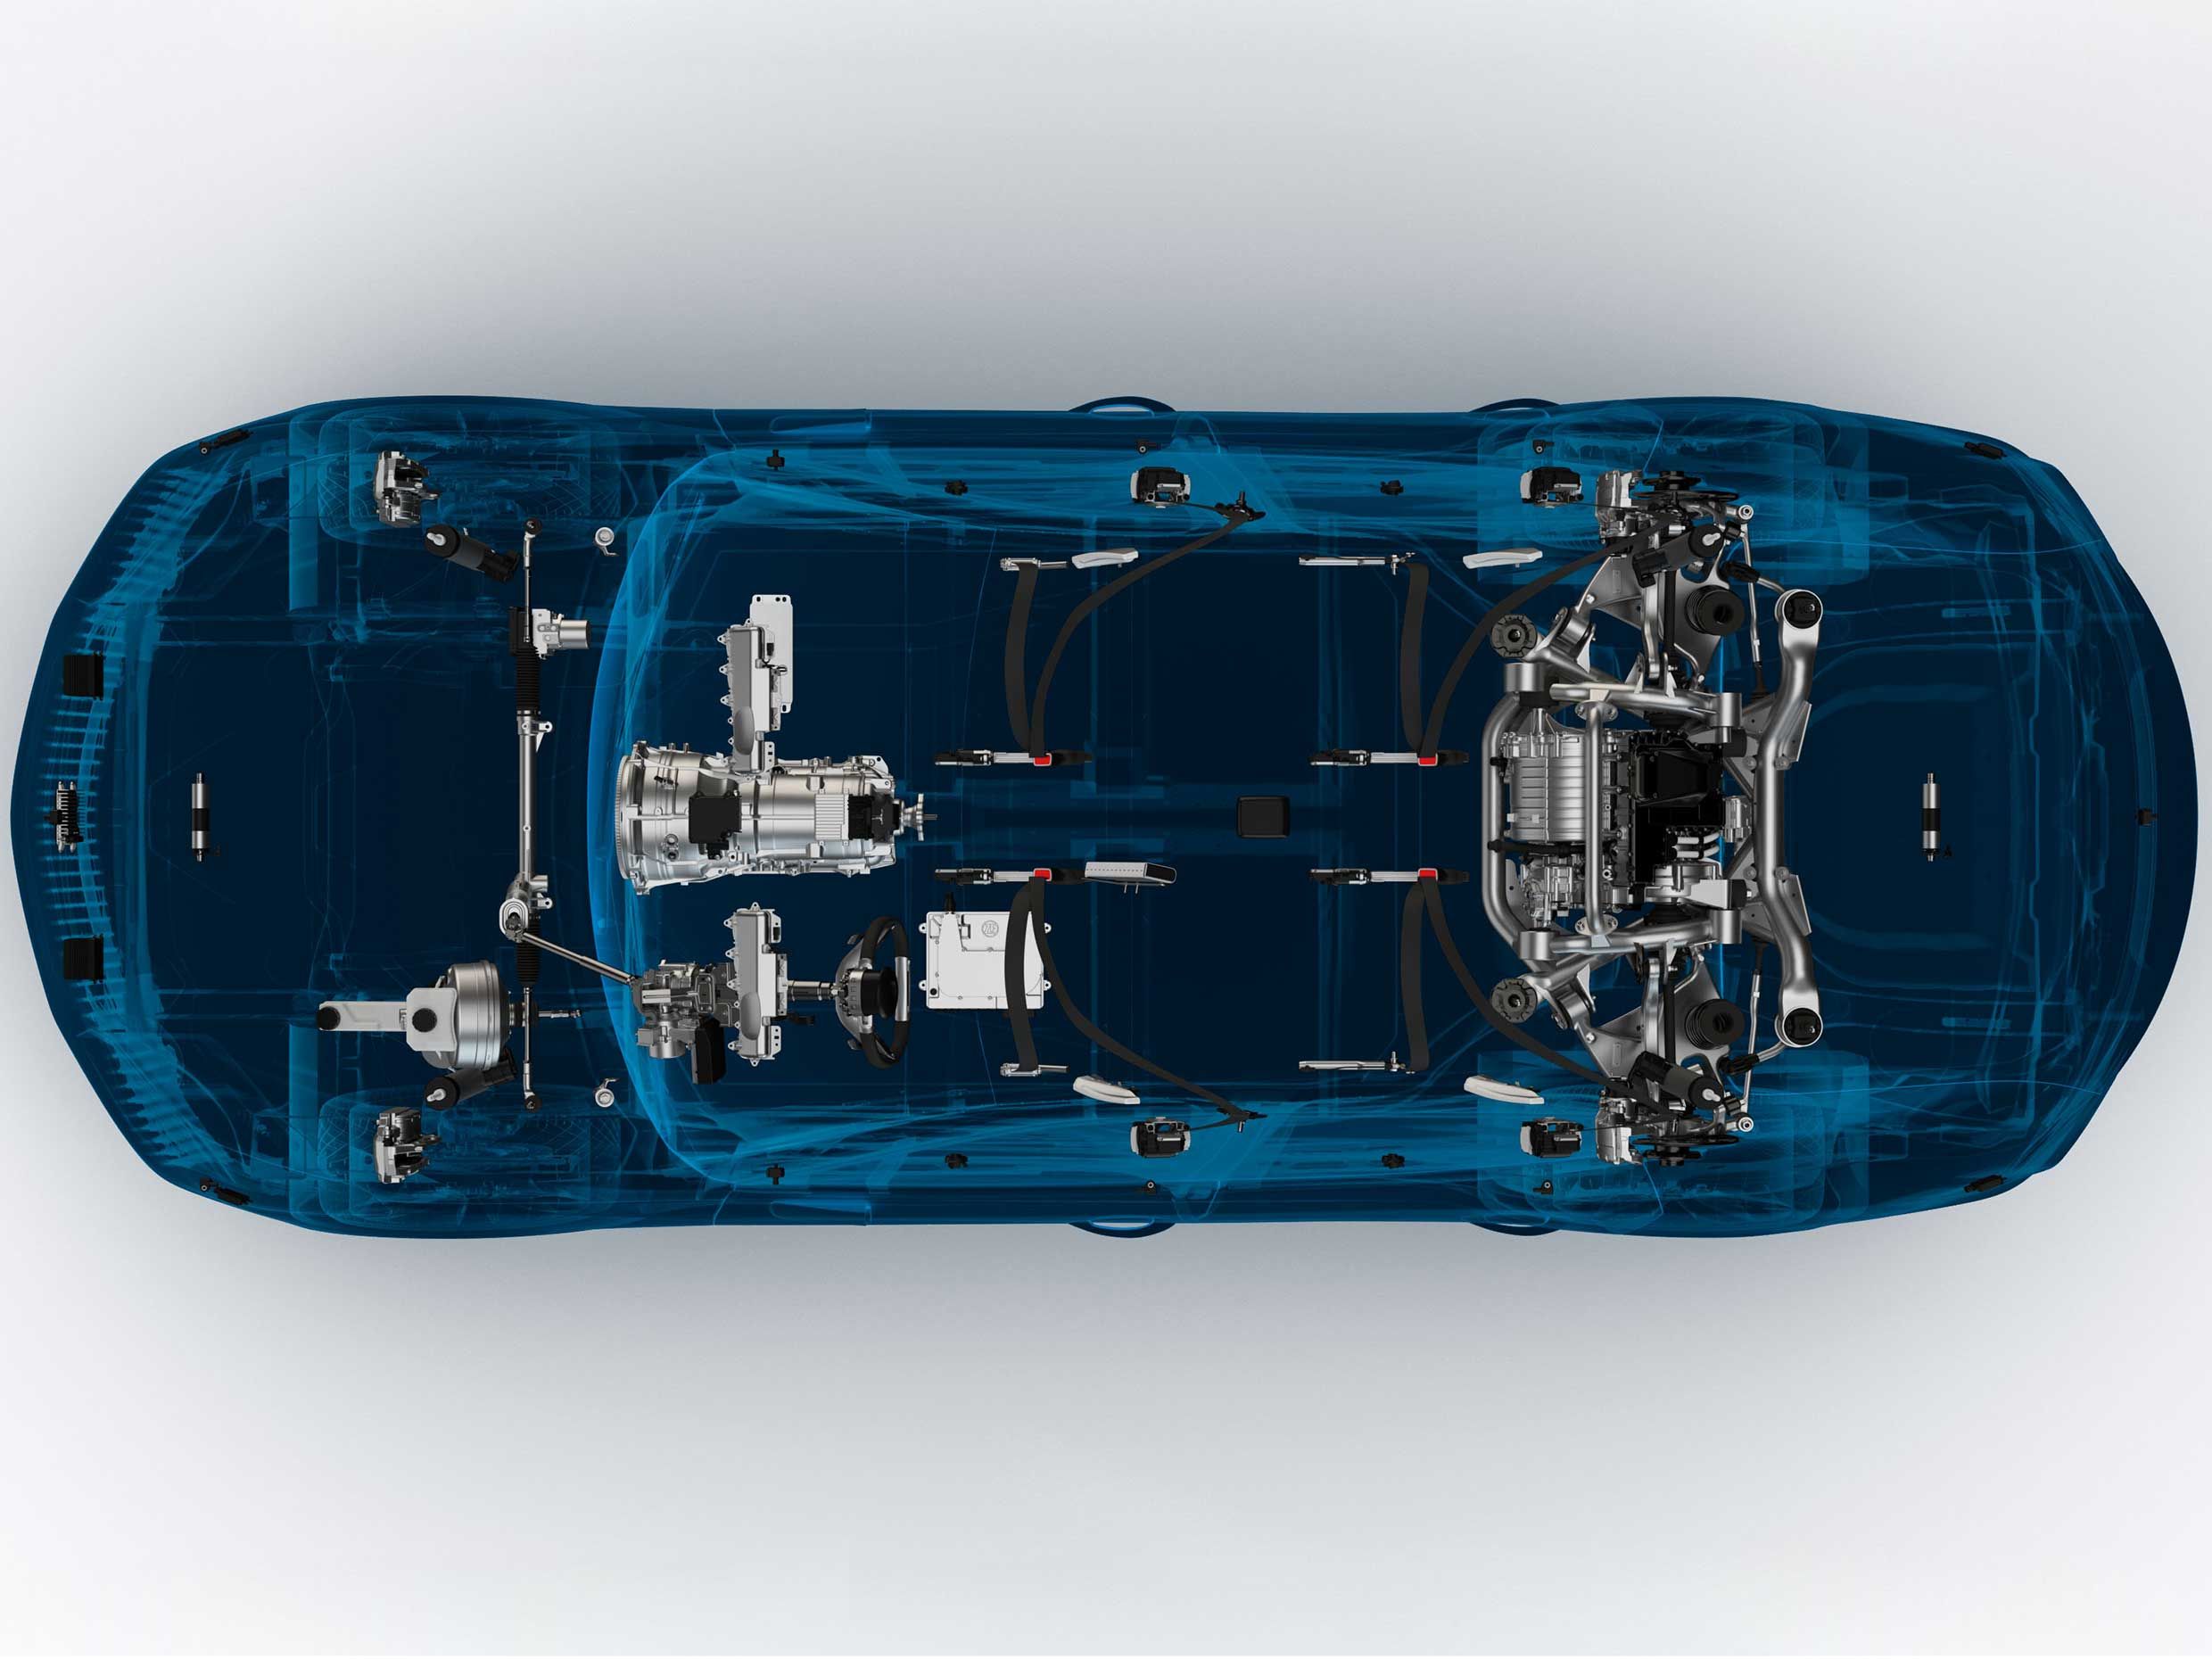 Photo of the inside of a car as seen from above.